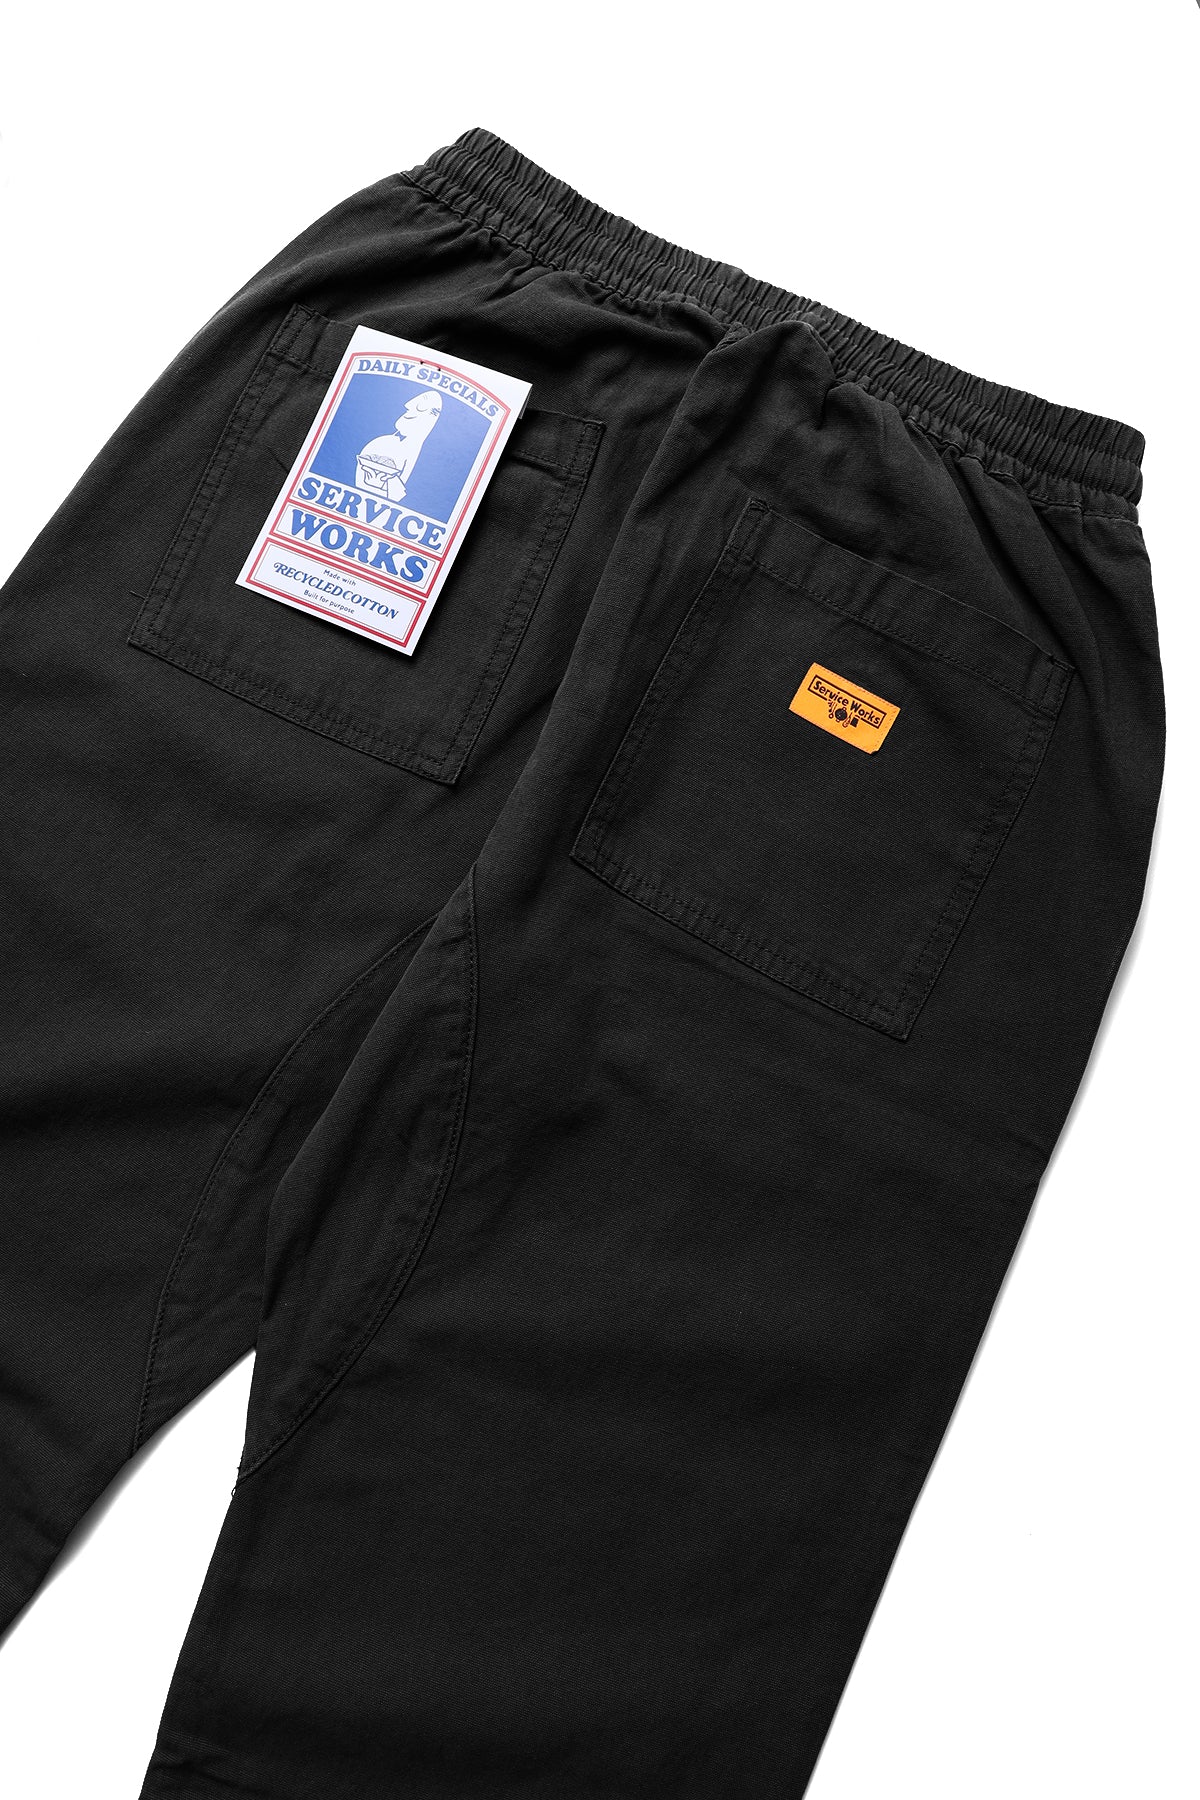 Service Works - Trade Chef Pants - Black